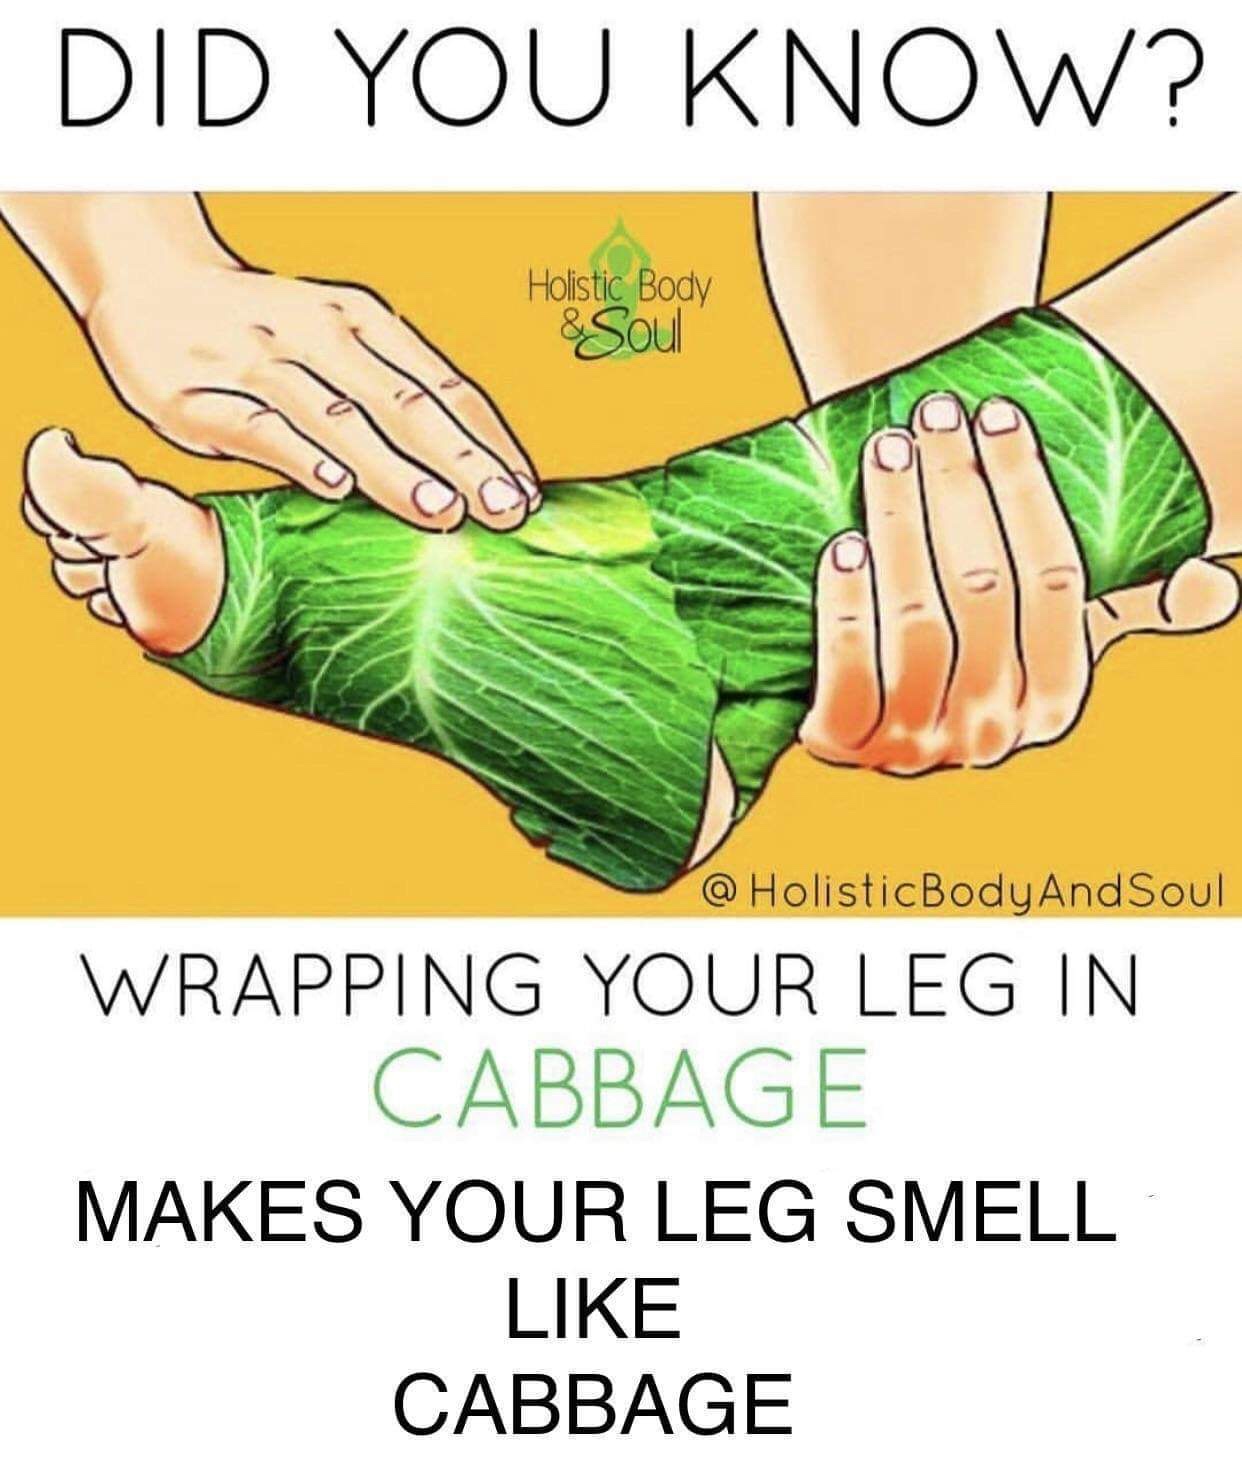 pseudoscience meme - Did You Know? Holistic Body & Soul @ HolisticBody And Soul Wrapping Your Leg In Cabbage Makes Your Leg Smell Cabbage